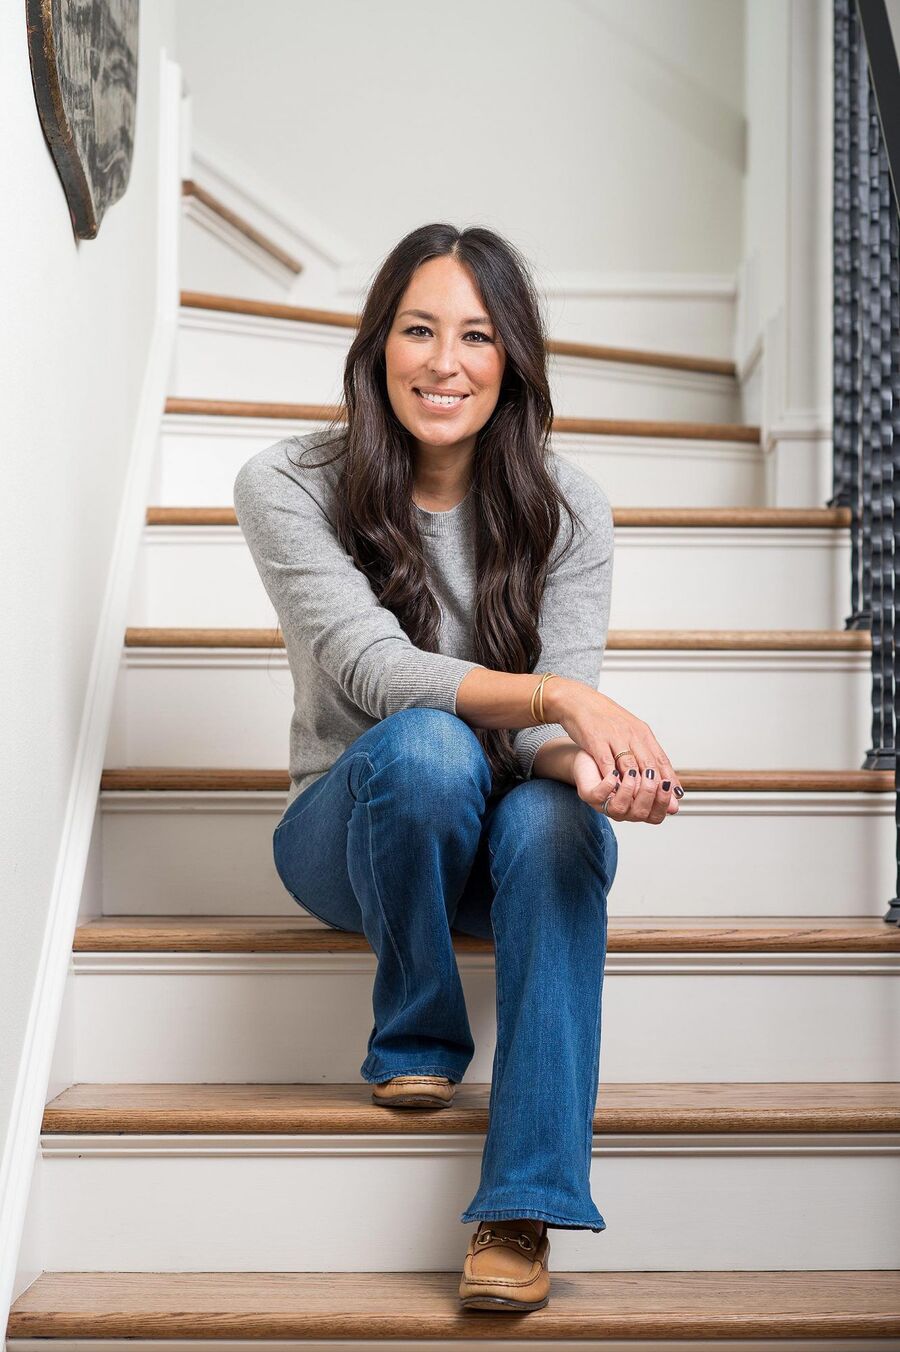 The-20-Most-Famous-Interior-Designers-1-joanna-gaines the 20 most famous interior designers The 20 Most Famous Interior Designers &#8211; part 1 The 20 Most Famous Interior Designers 1 joanna gaines